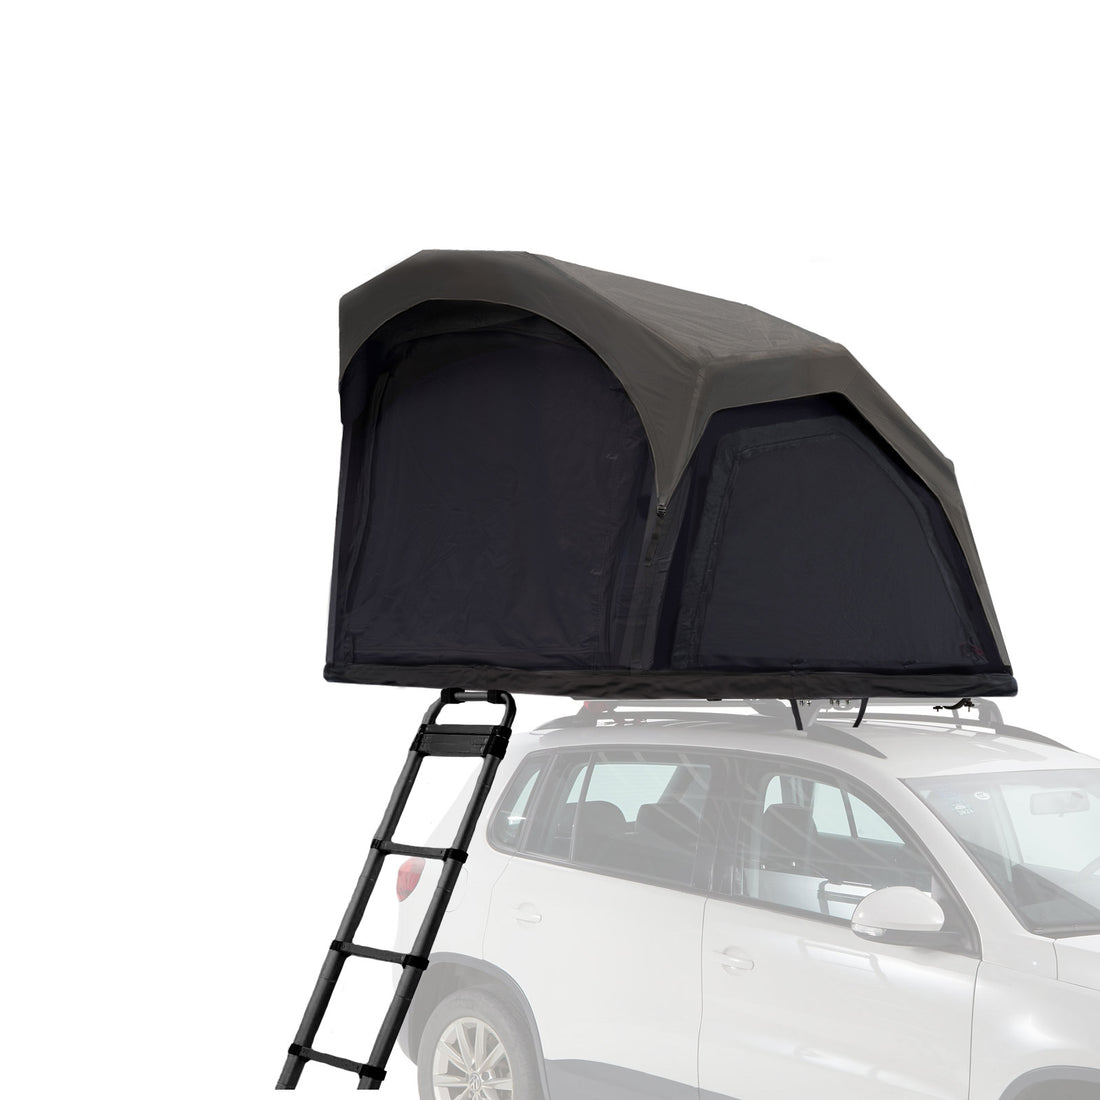 Roof tent qeedo Freedom Air 2